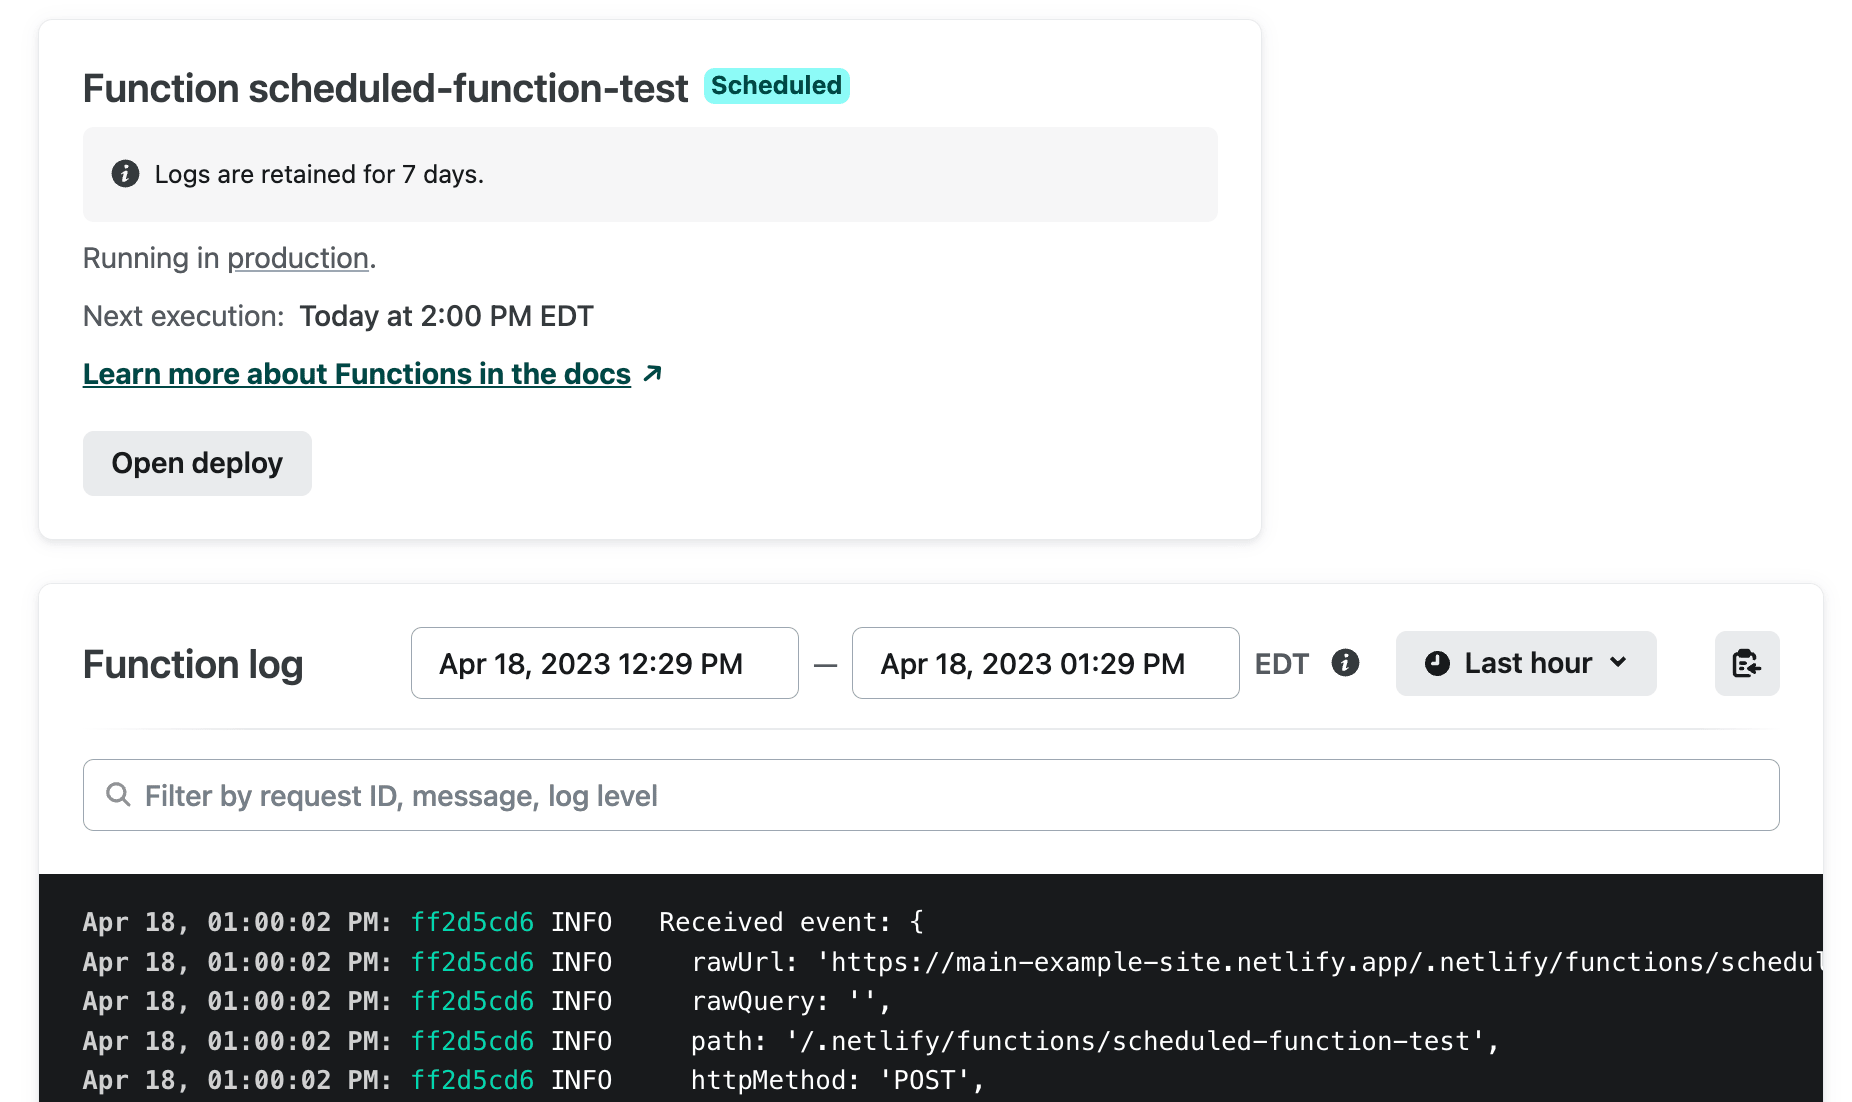 Example of a scheduled function’s details in the Netlify UI